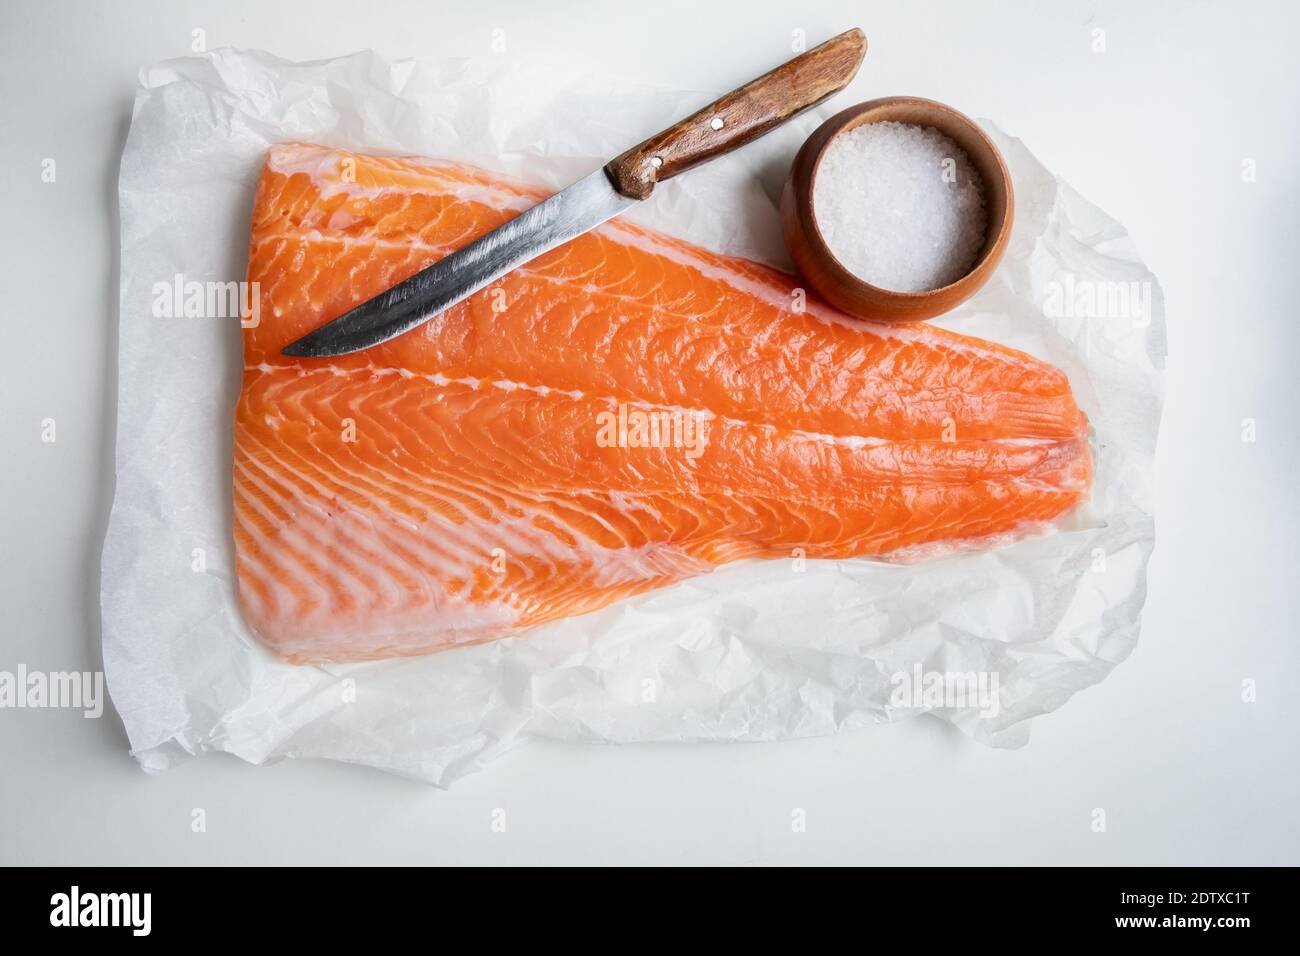 Fillet of salmon fish on wooden table with knife and salt. Food photography Stock Photo